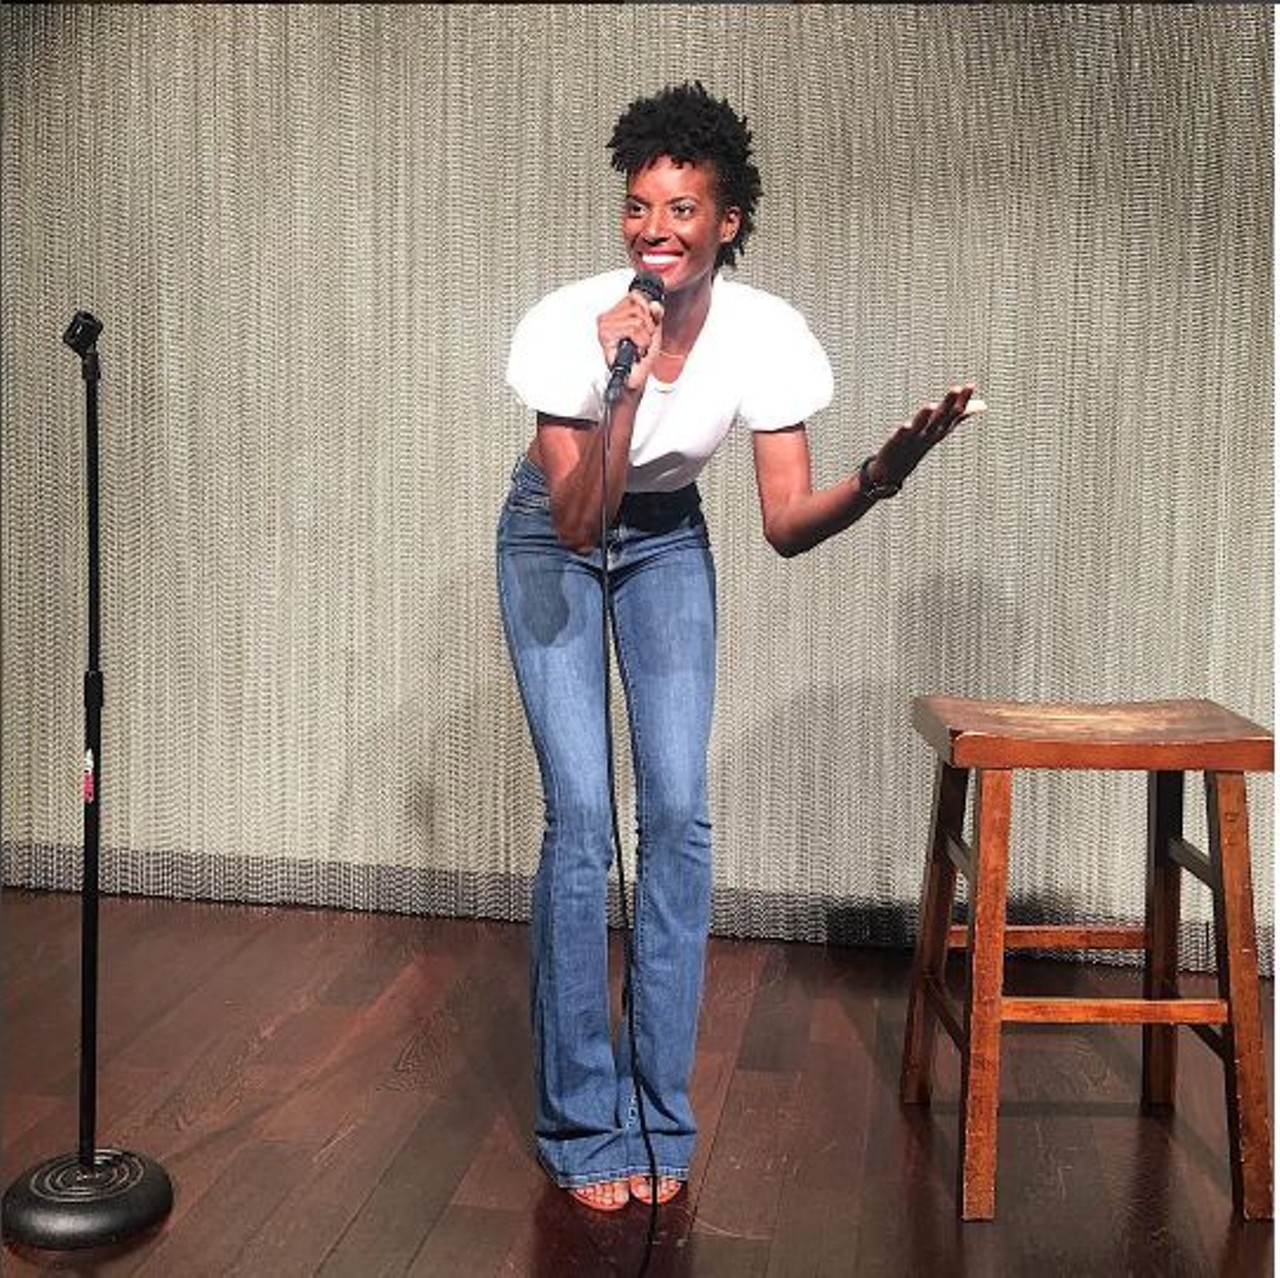 Crack up at a live comedy show 
Head to a local comedy club, like Laugh Out Loud Comedy Club, and attend an open- mic night or a comedy show. Laughing so hard that you cry is always a great way to spend the evening. 
Photo via Instagram, zainabjohnson